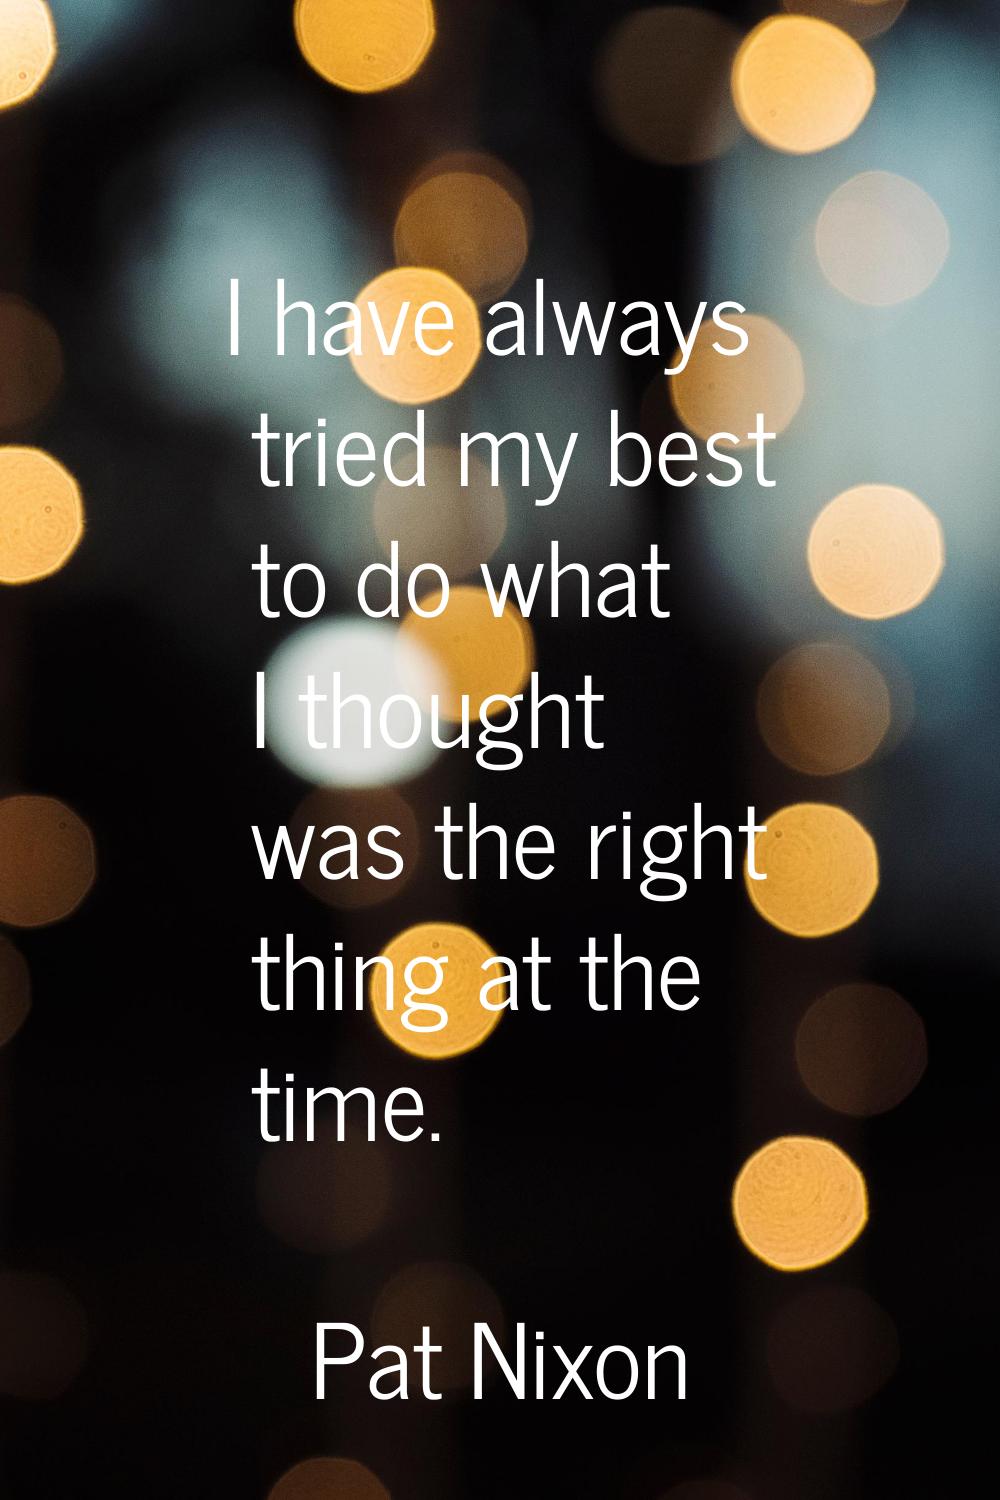 I have always tried my best to do what I thought was the right thing at the time.